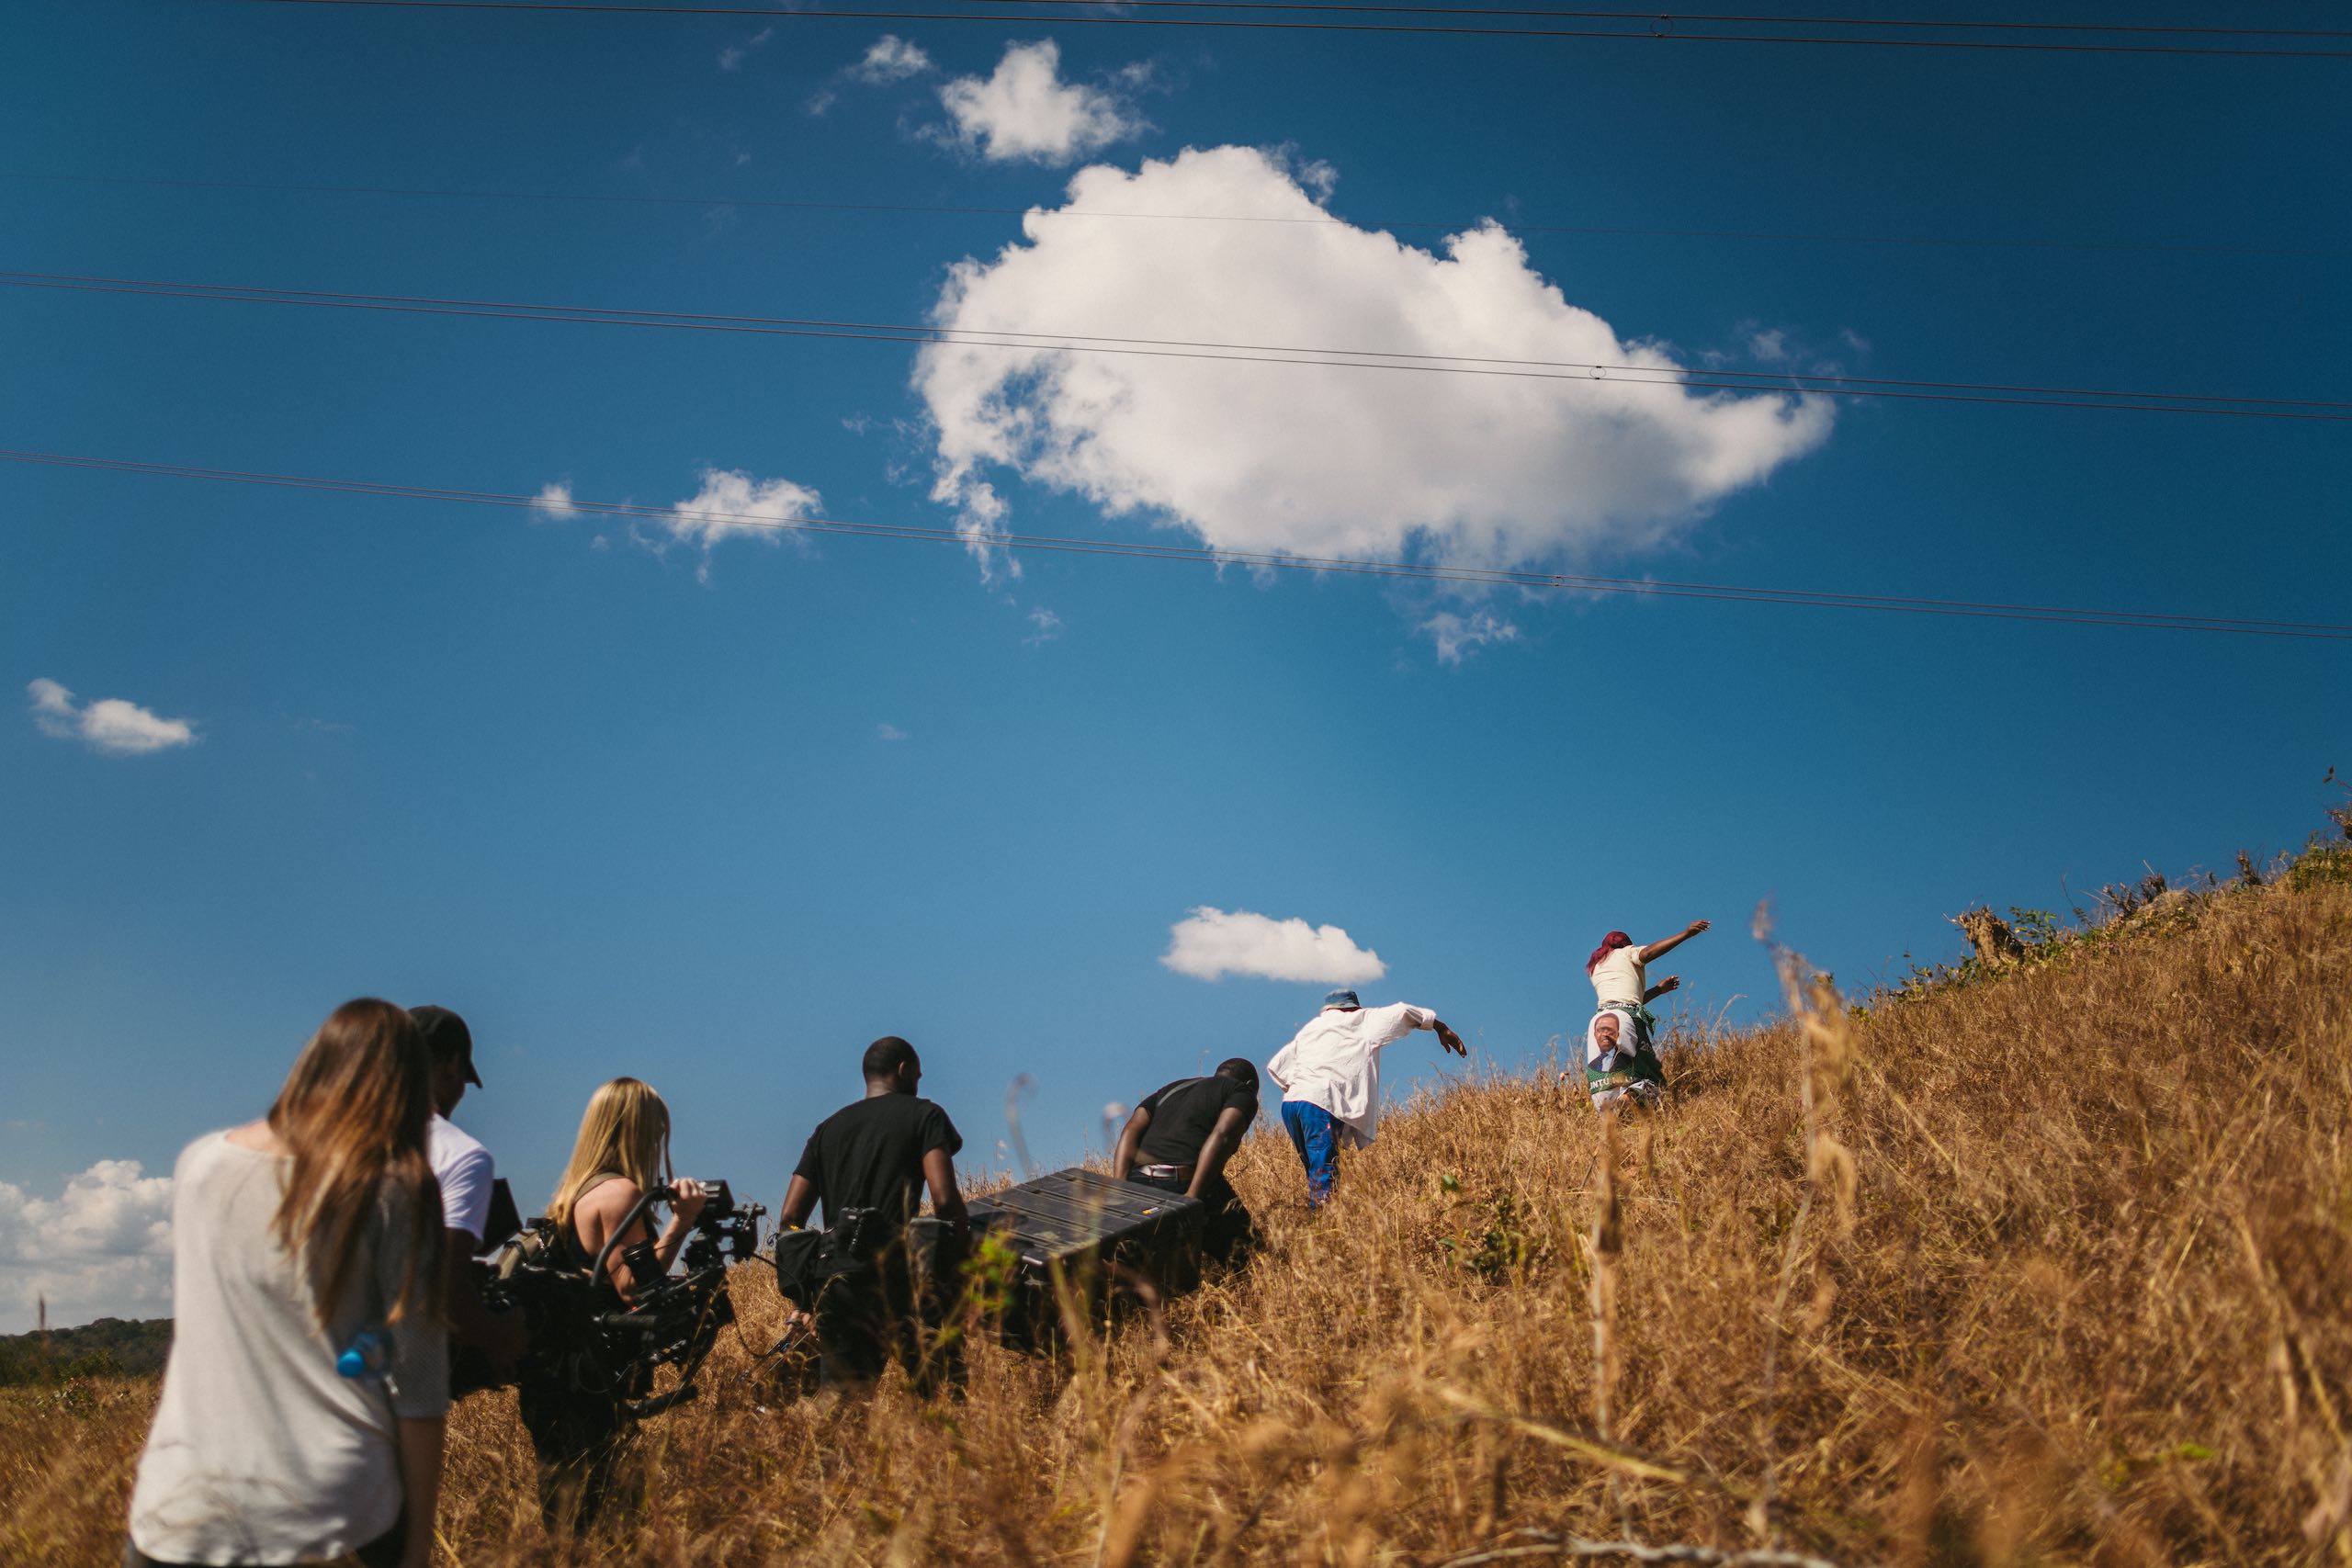 Video Production Abroad with crew members climbing a hill carrying equipment